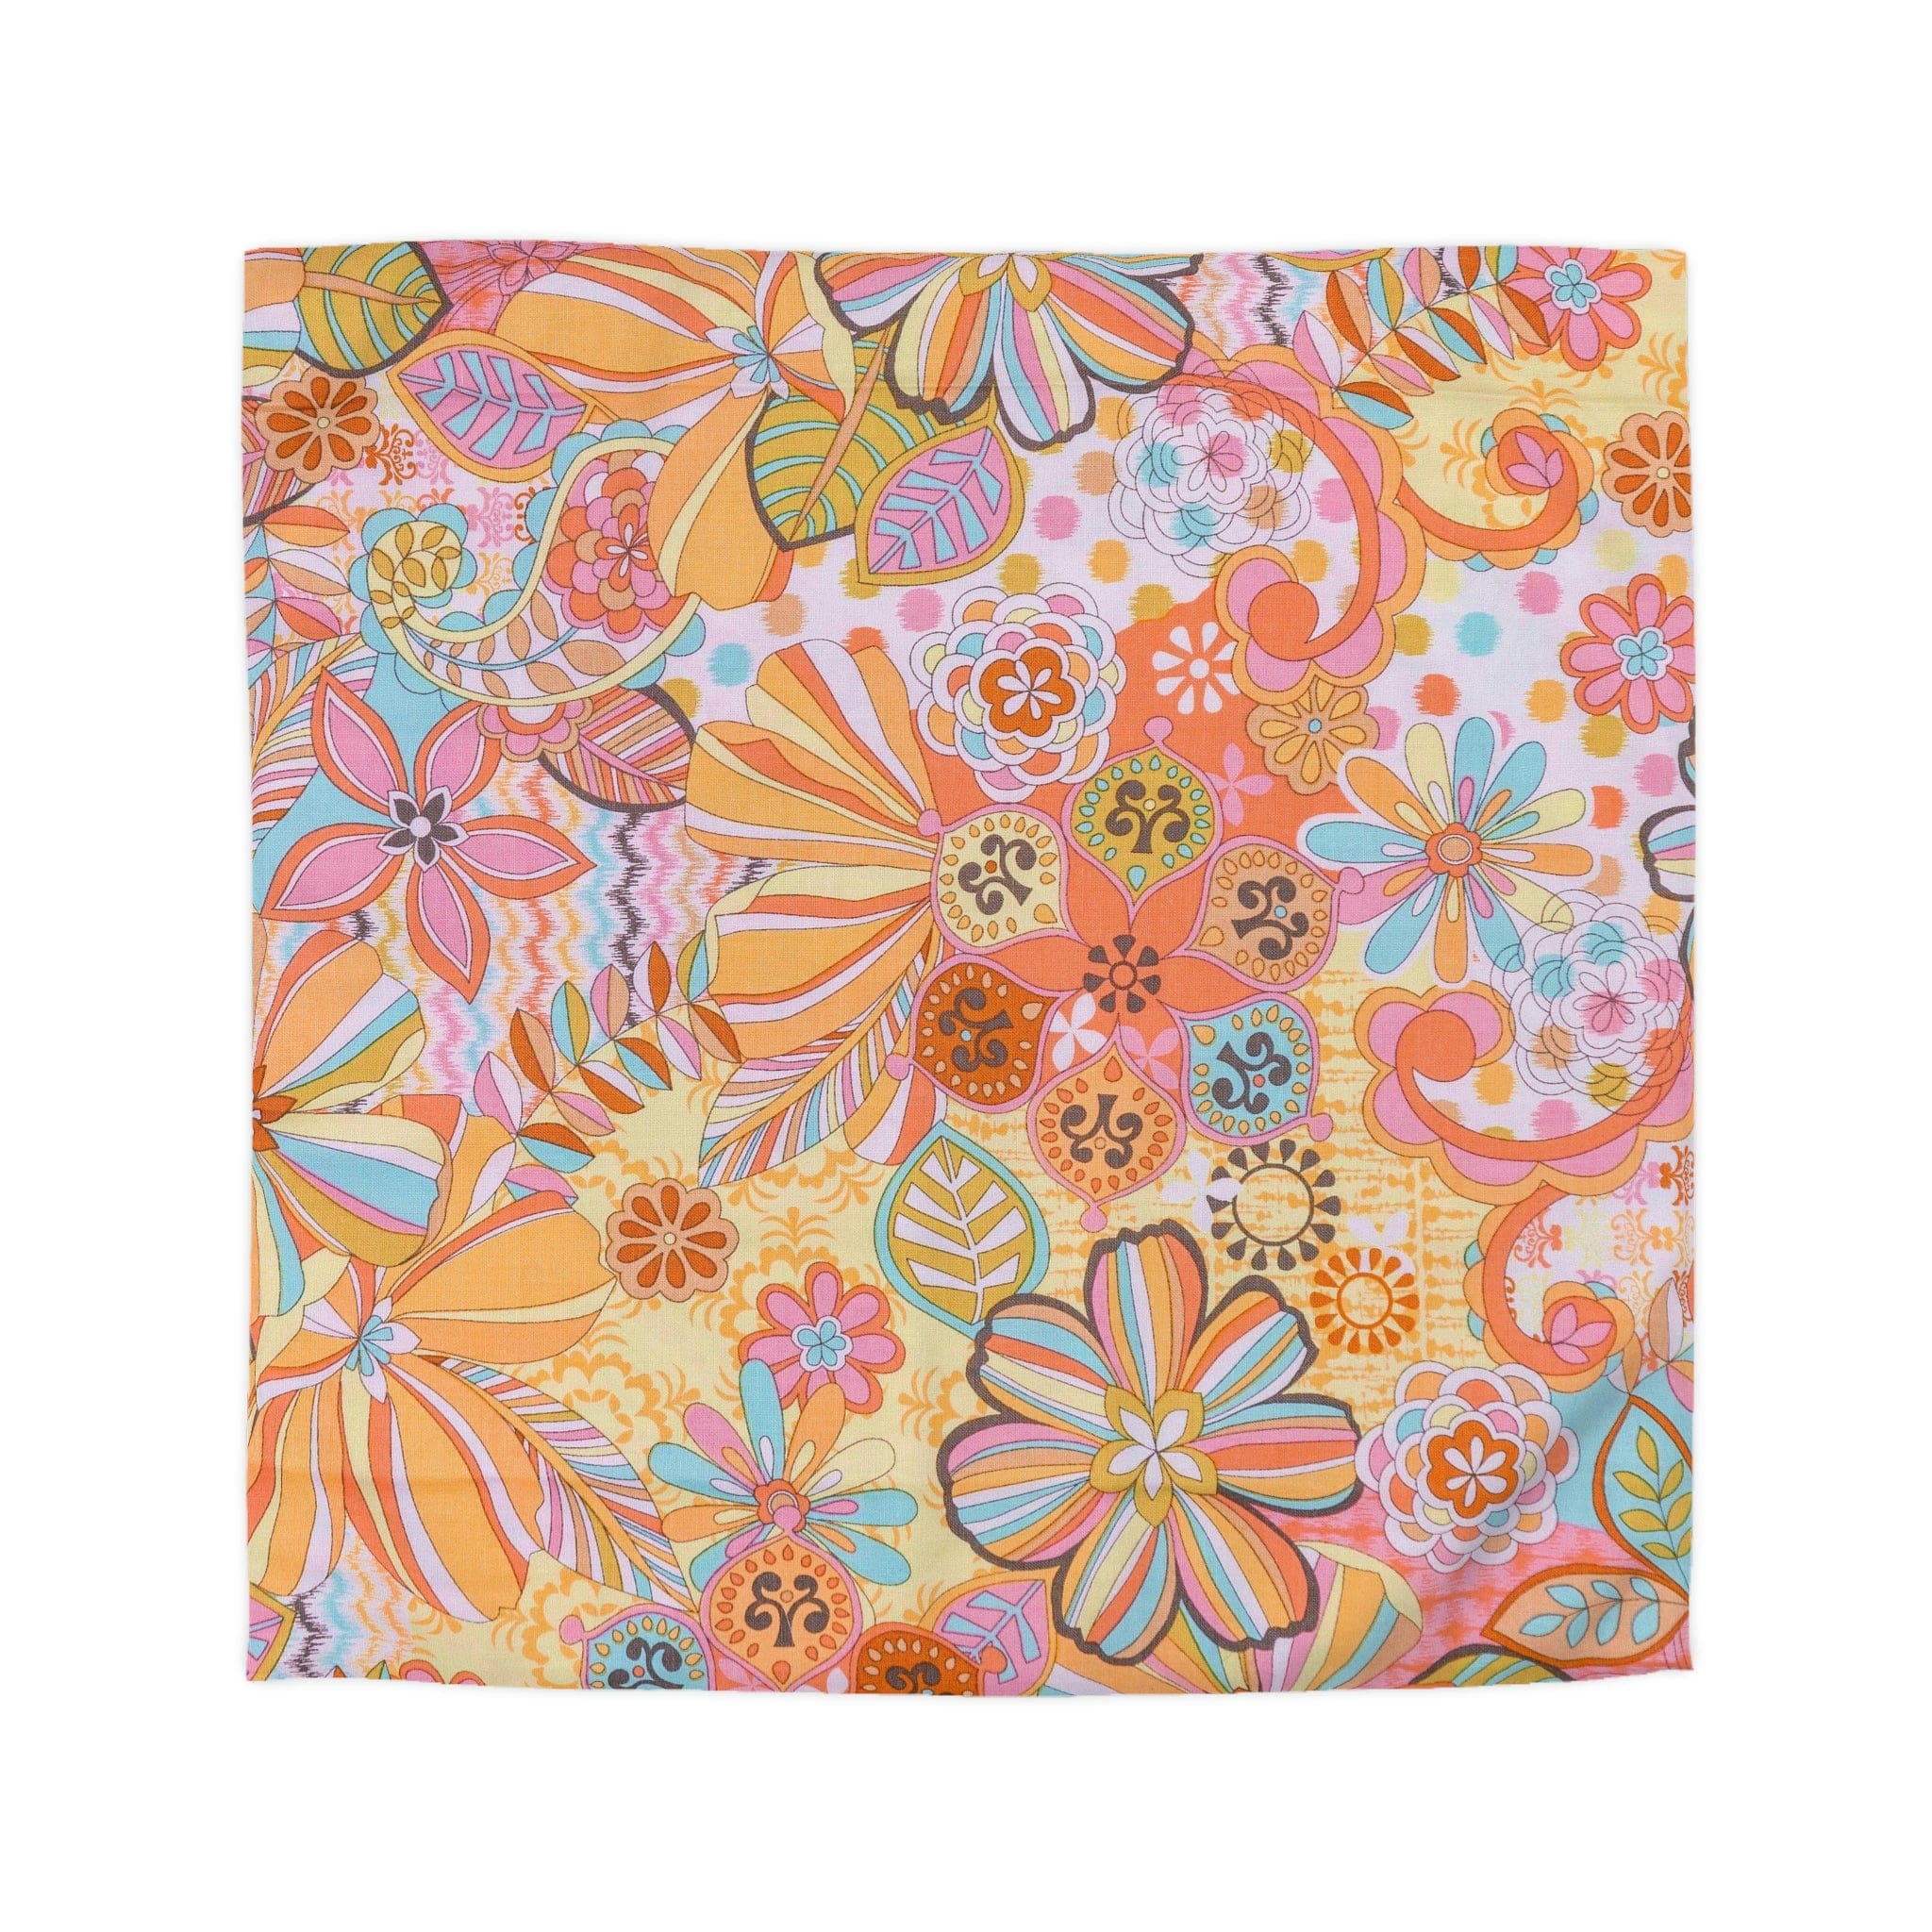 Kate McEnroe New York Retro Trippy Flower Power Duvet Cover, 70s Mid Mod Hippie Chic Floral Bedroom Decor with Groovy Orange, Yellow, and Blue PaletteDuvet Covers94699745414280434805